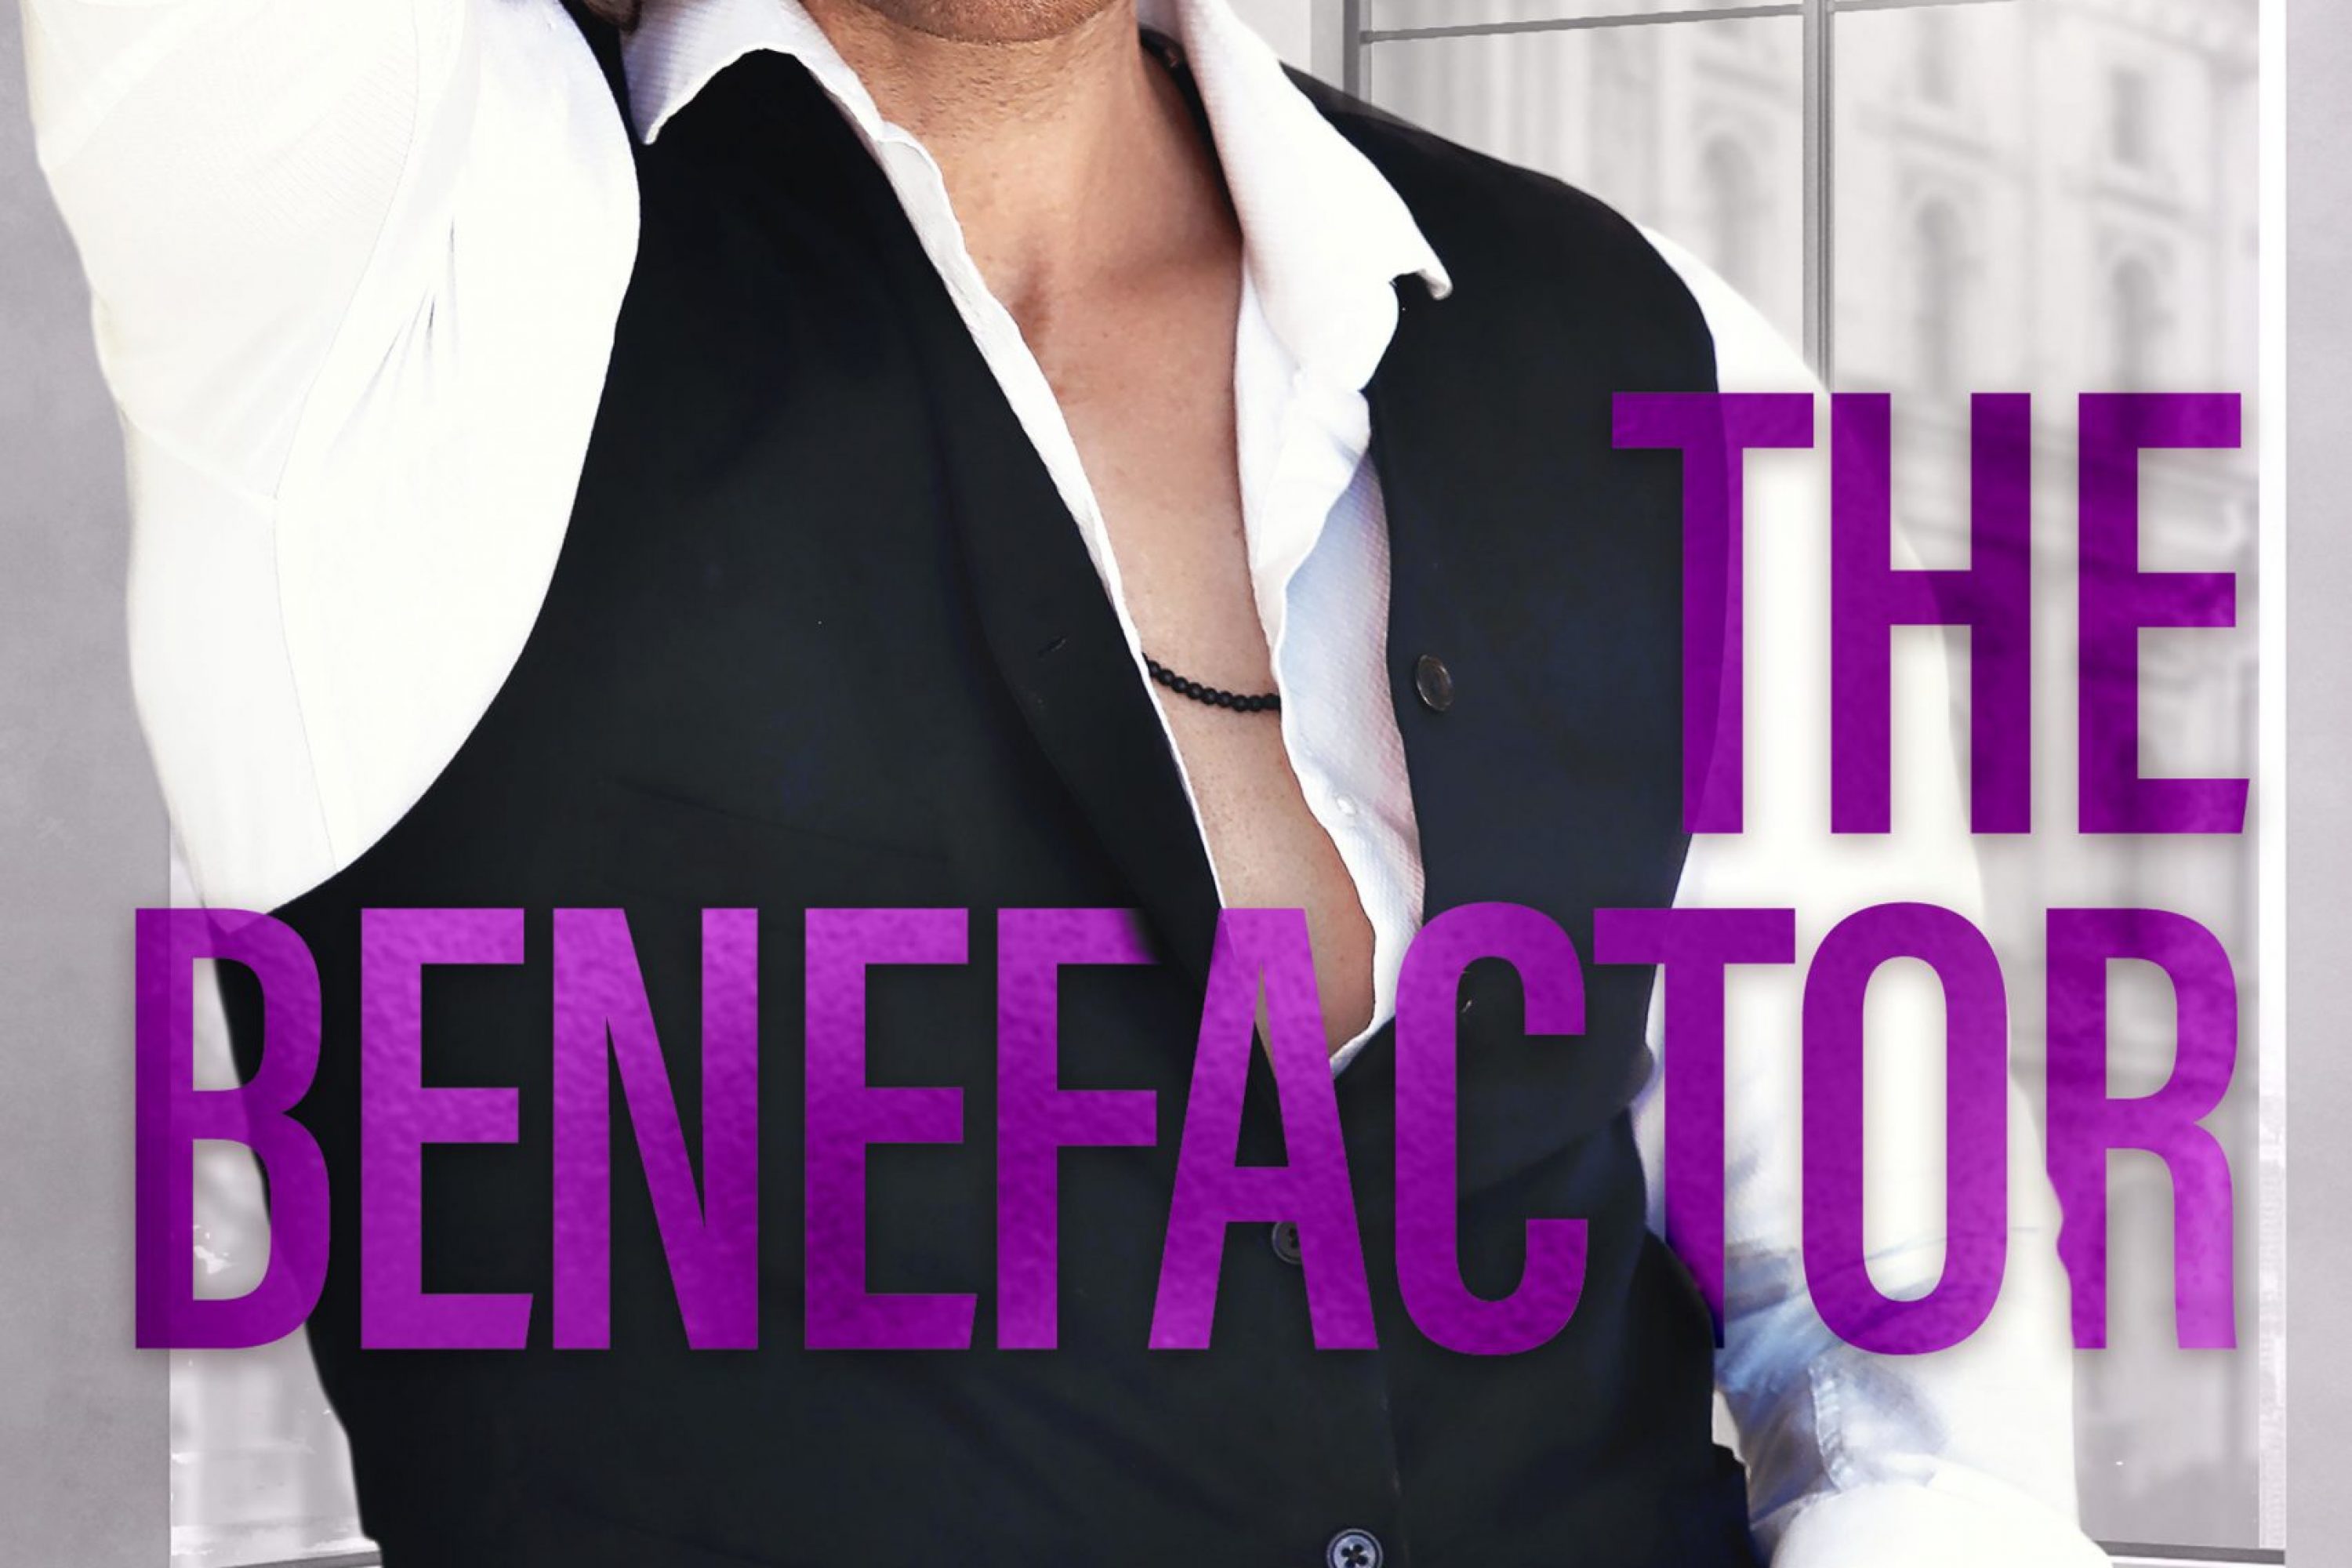 Review: The Benefactor by Nana Malone